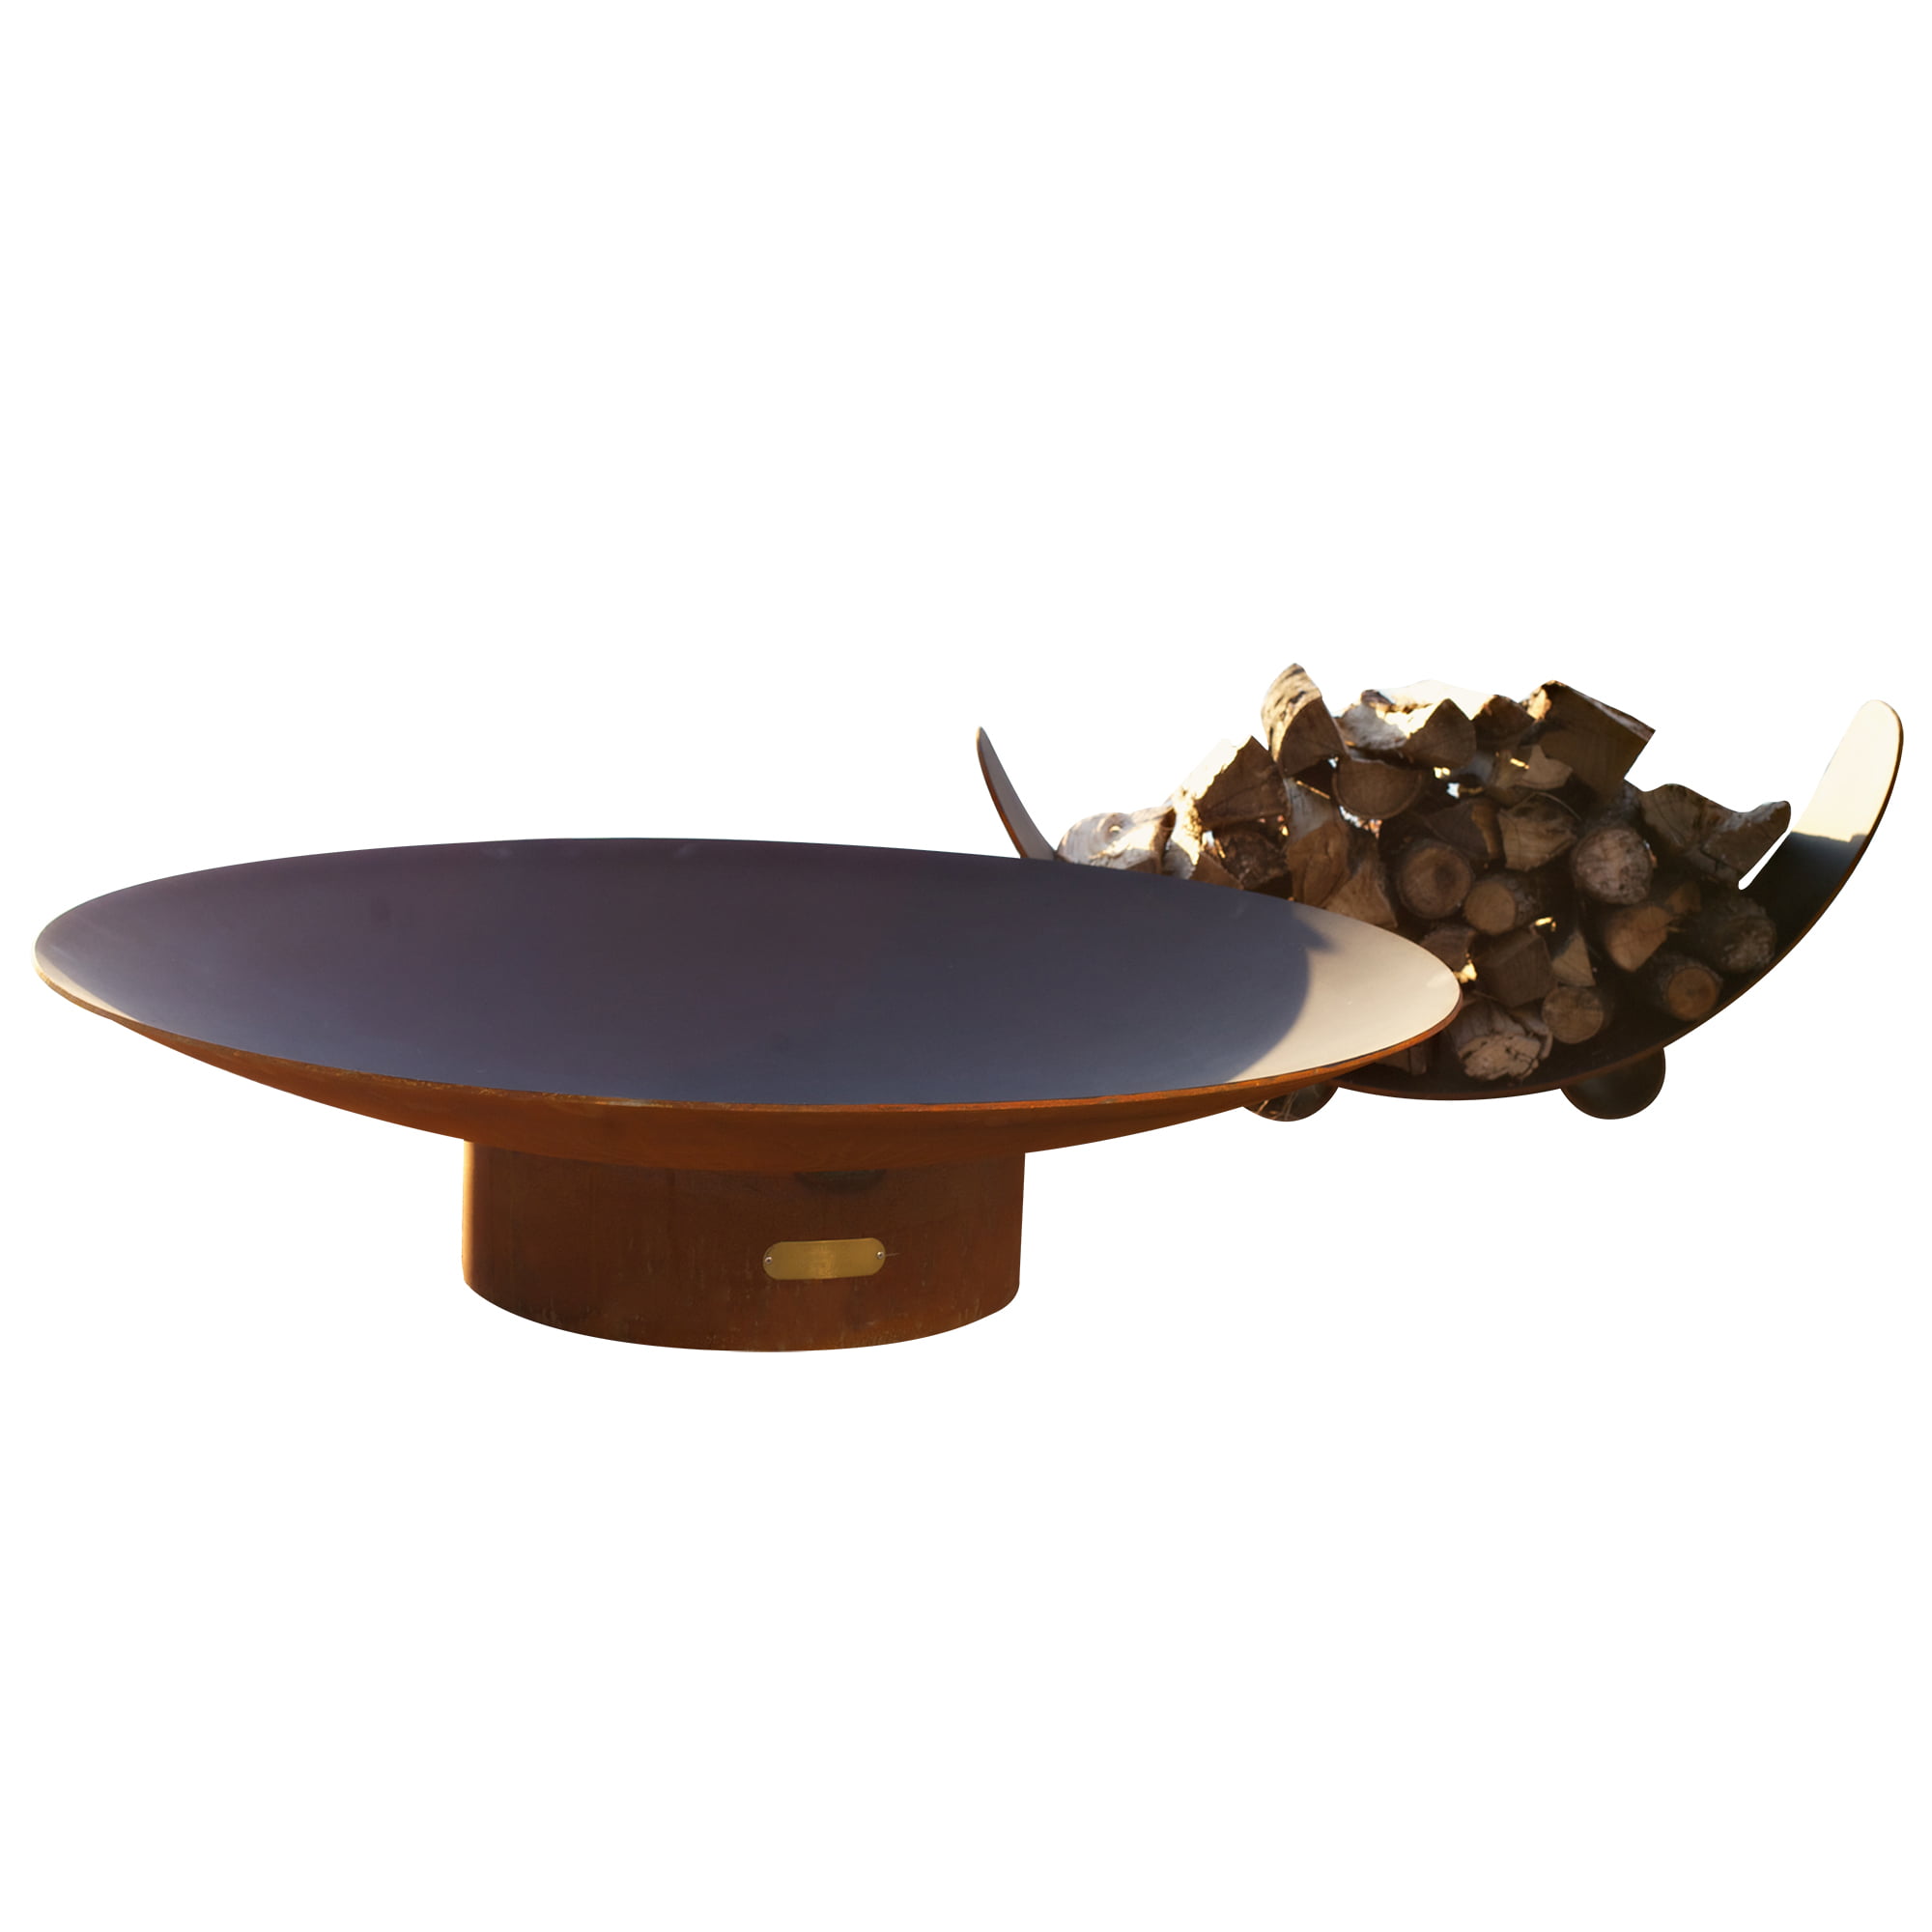 Asia 72 Inch Wood Burning Fire Pit Bowl, Steel Fire Pit Bowl